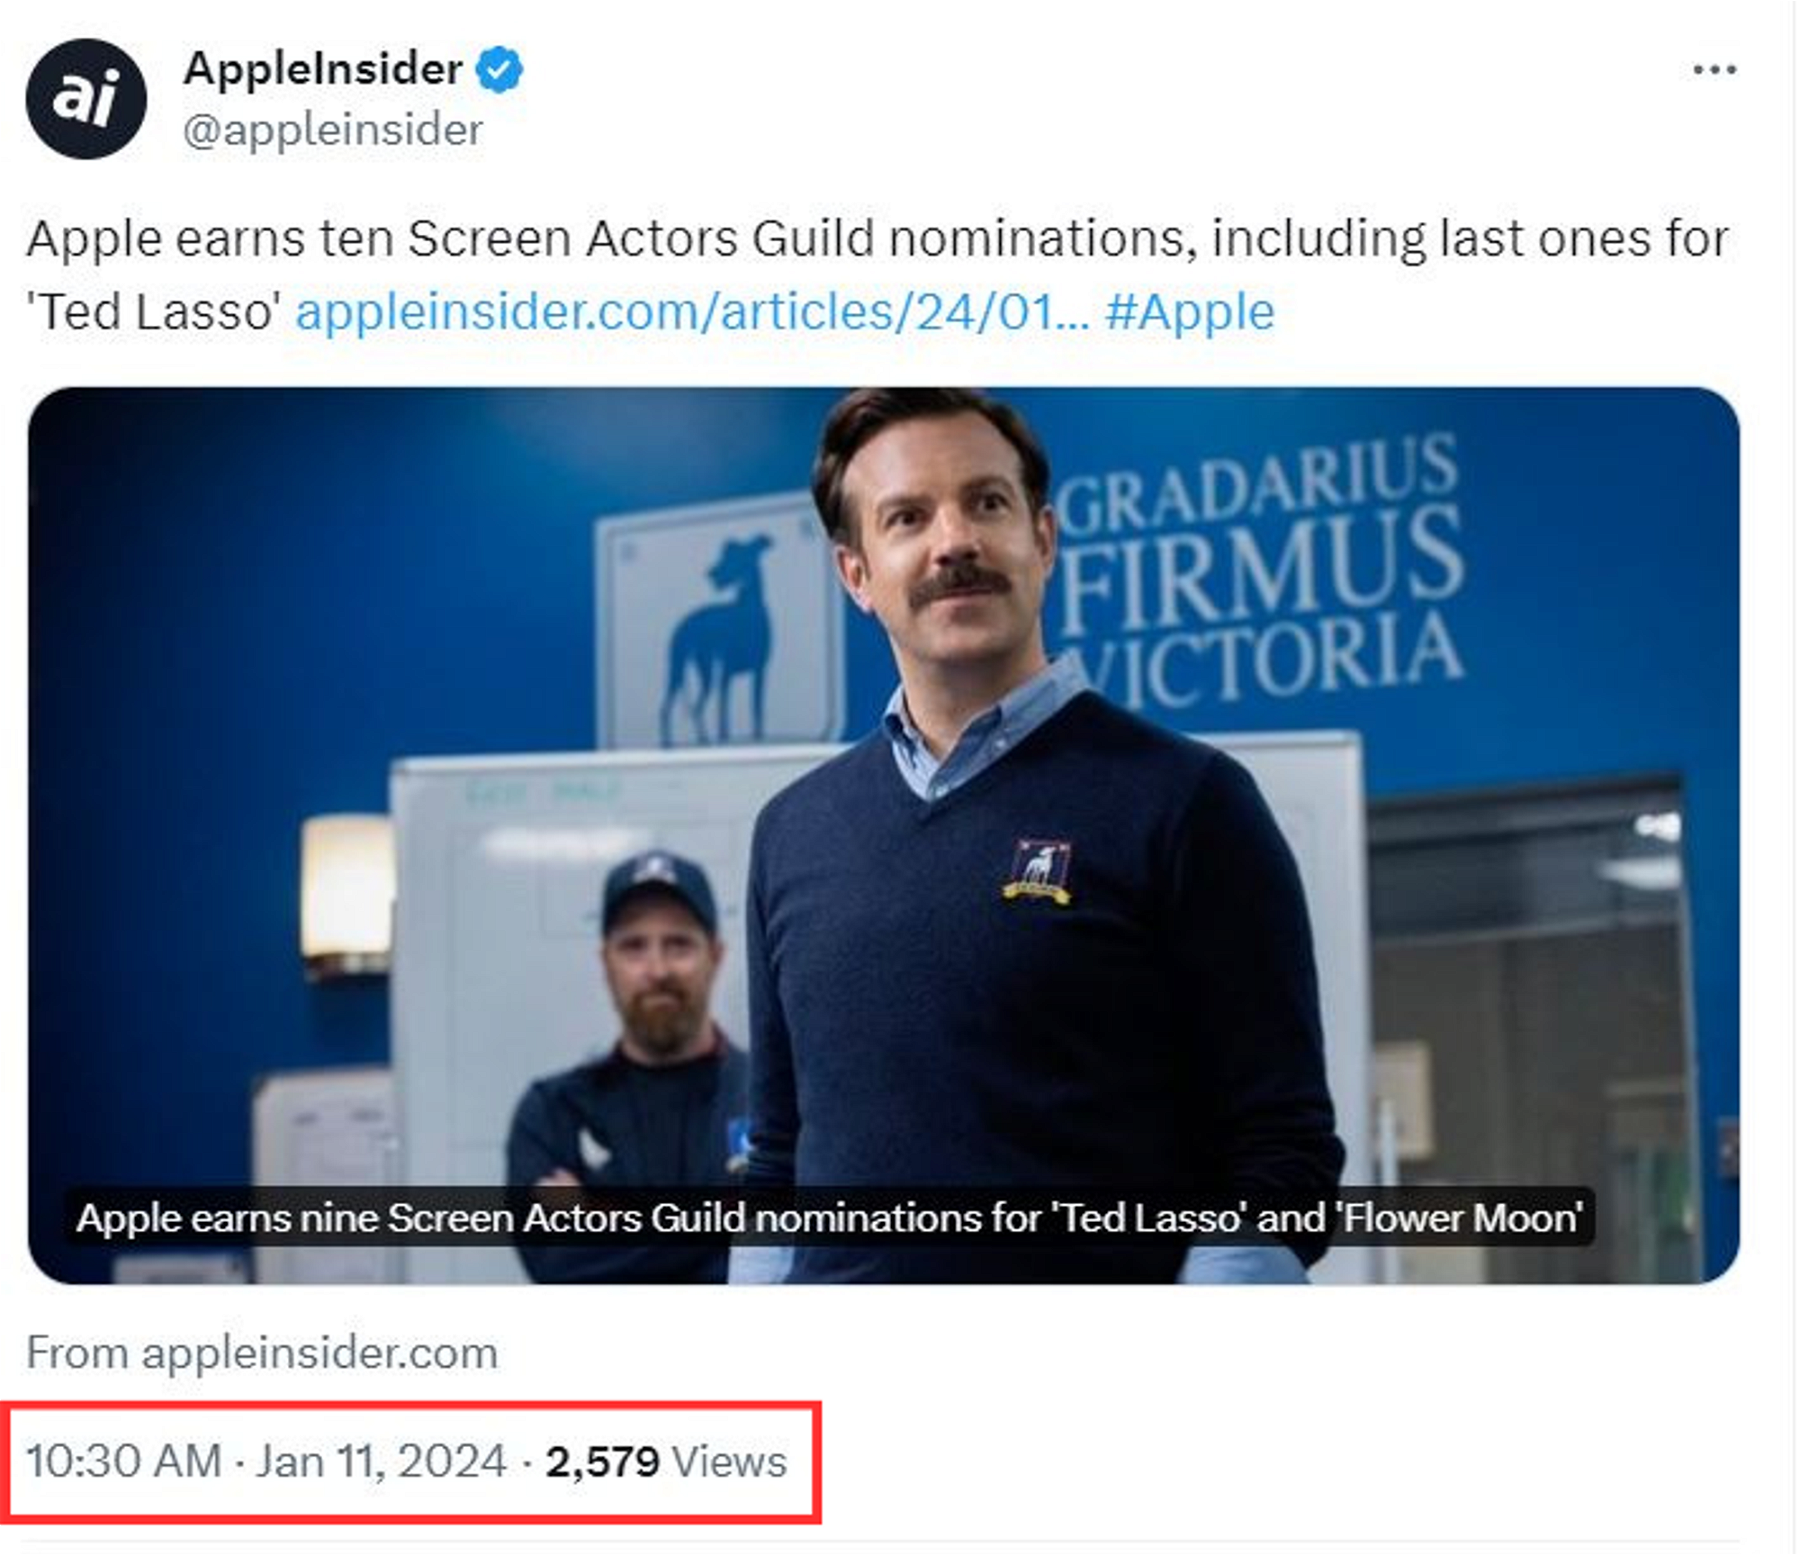 See how Appleinsider post’s on Twitter early mornings to garner 2.5K views in a matter of no more than 30 mins. (Took this screenshot at around 11AM)